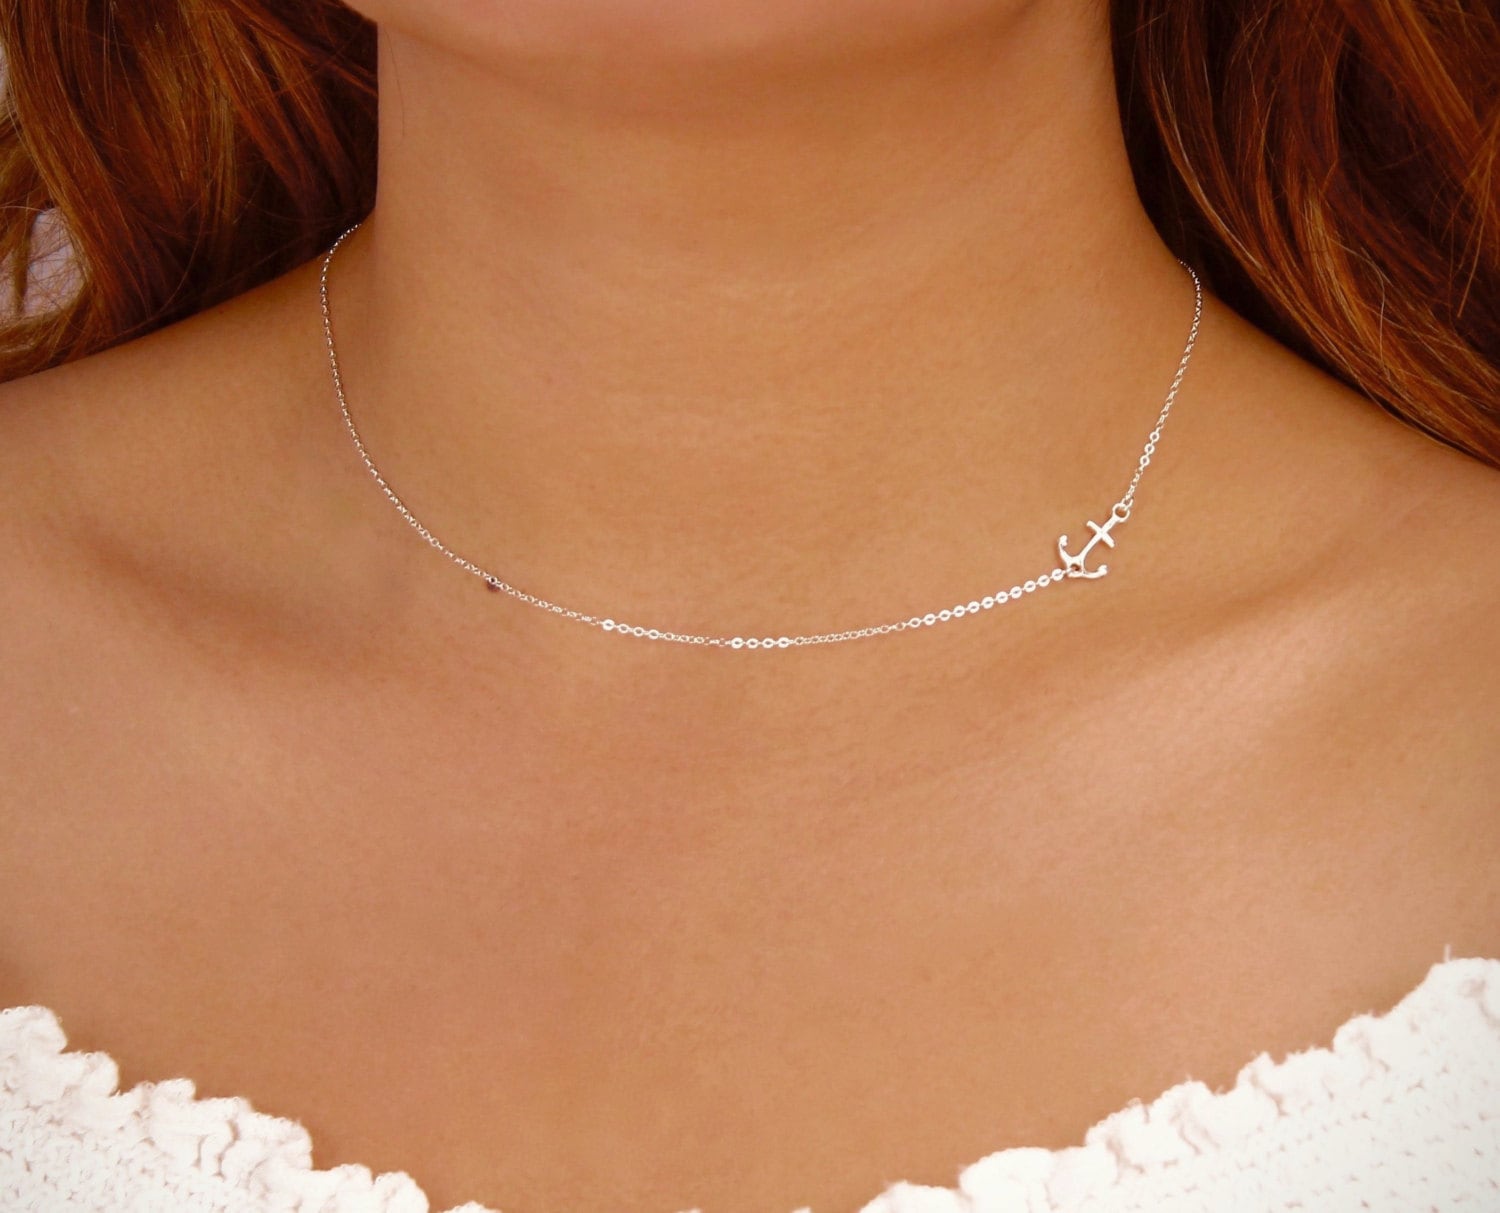 Small Sideways Anchor Necklace Delicate Choker - Etsy